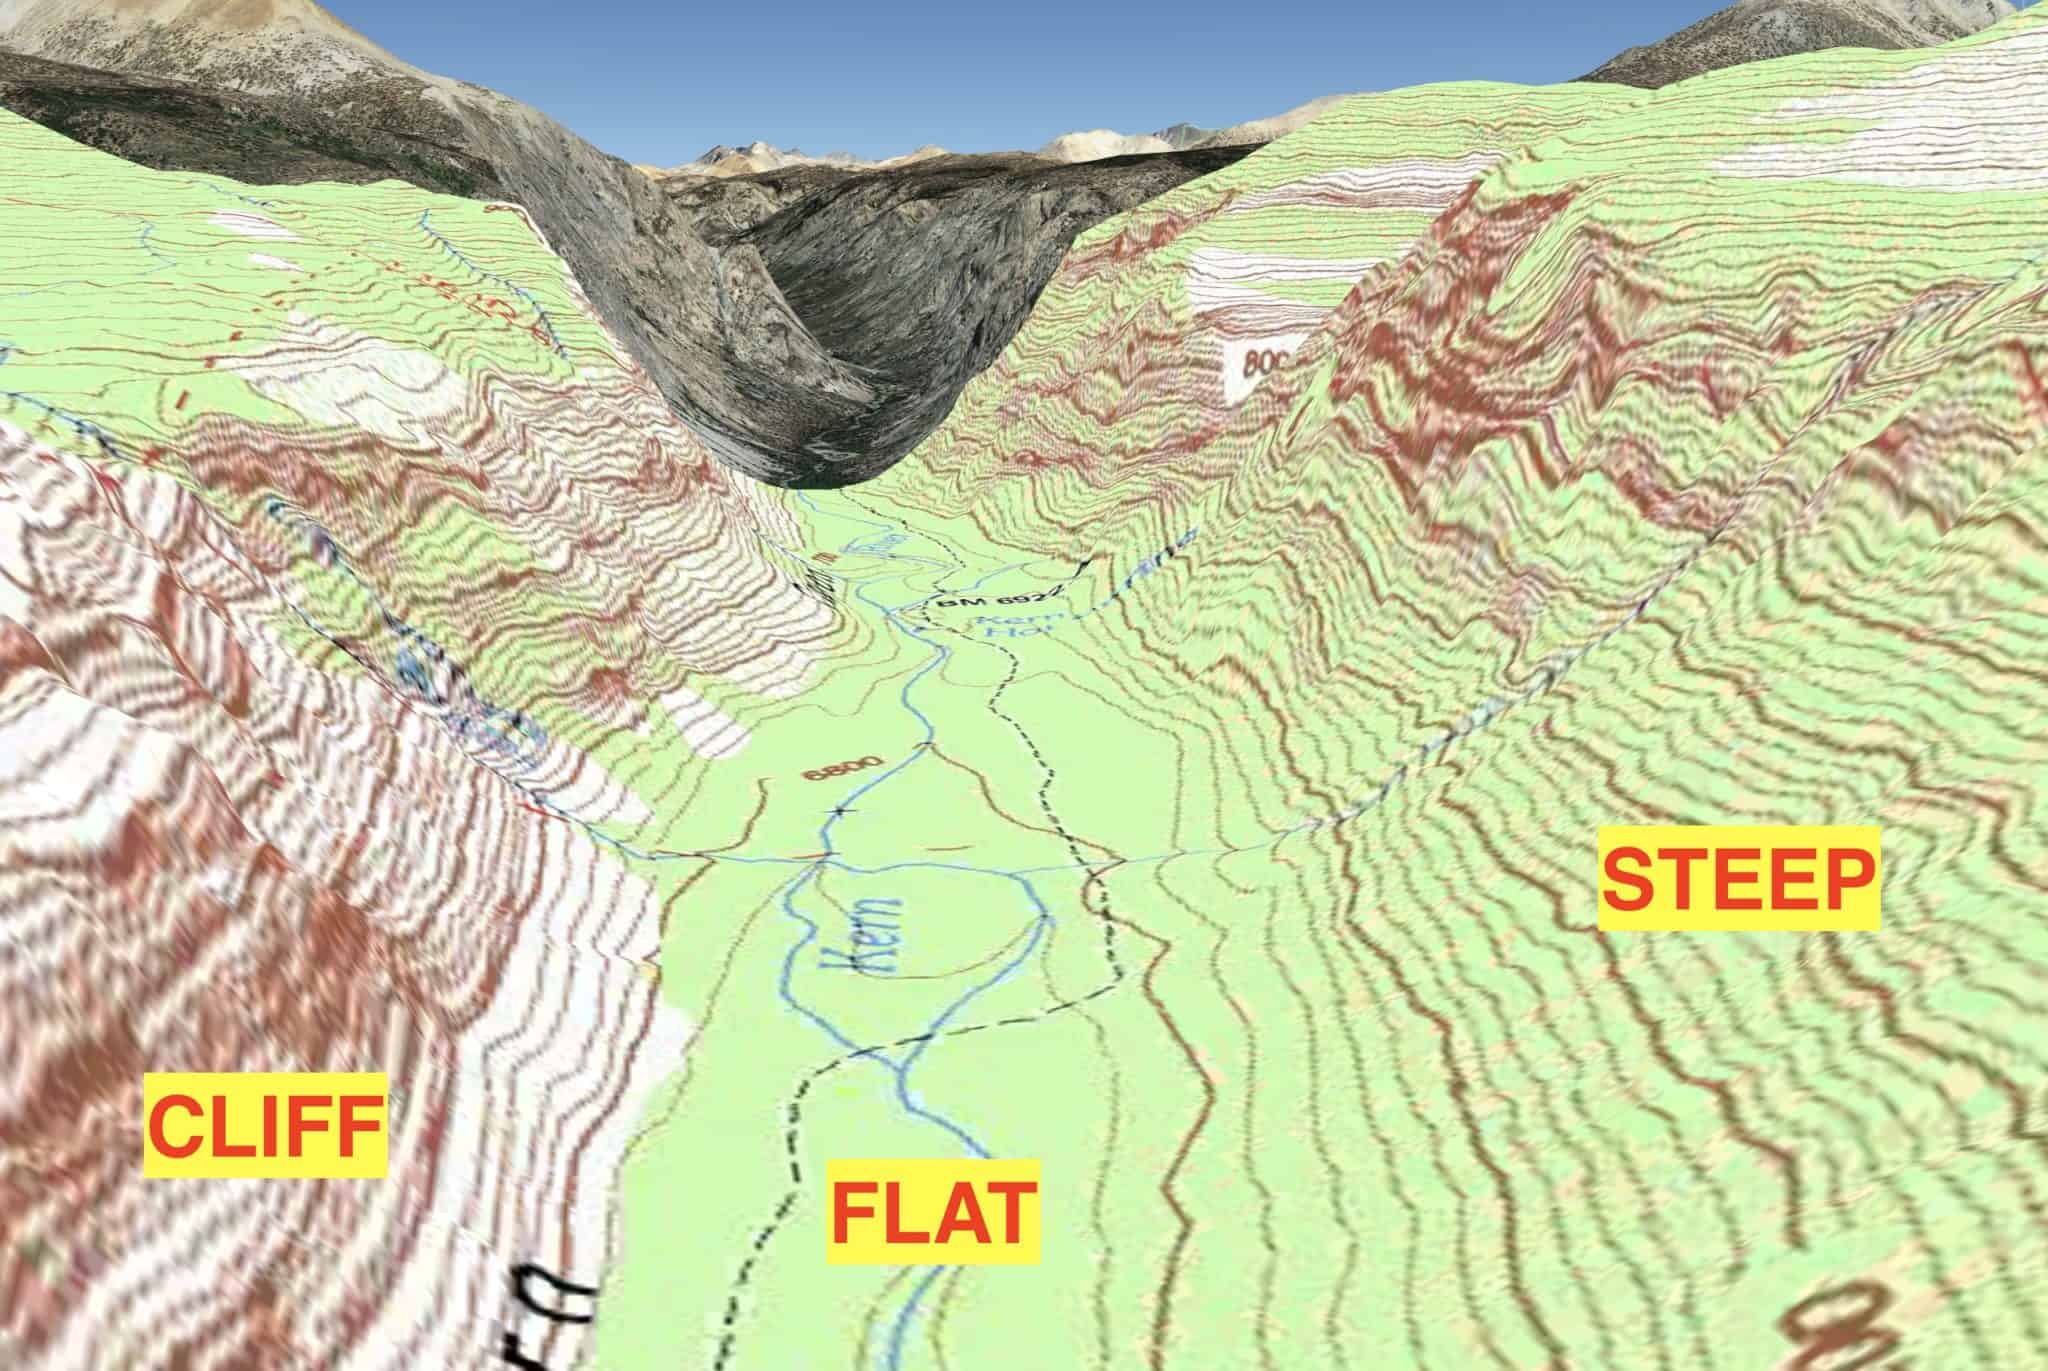 How To Use Topographic Maps In Google Earth - BEST GAMES WALKTHROUGH